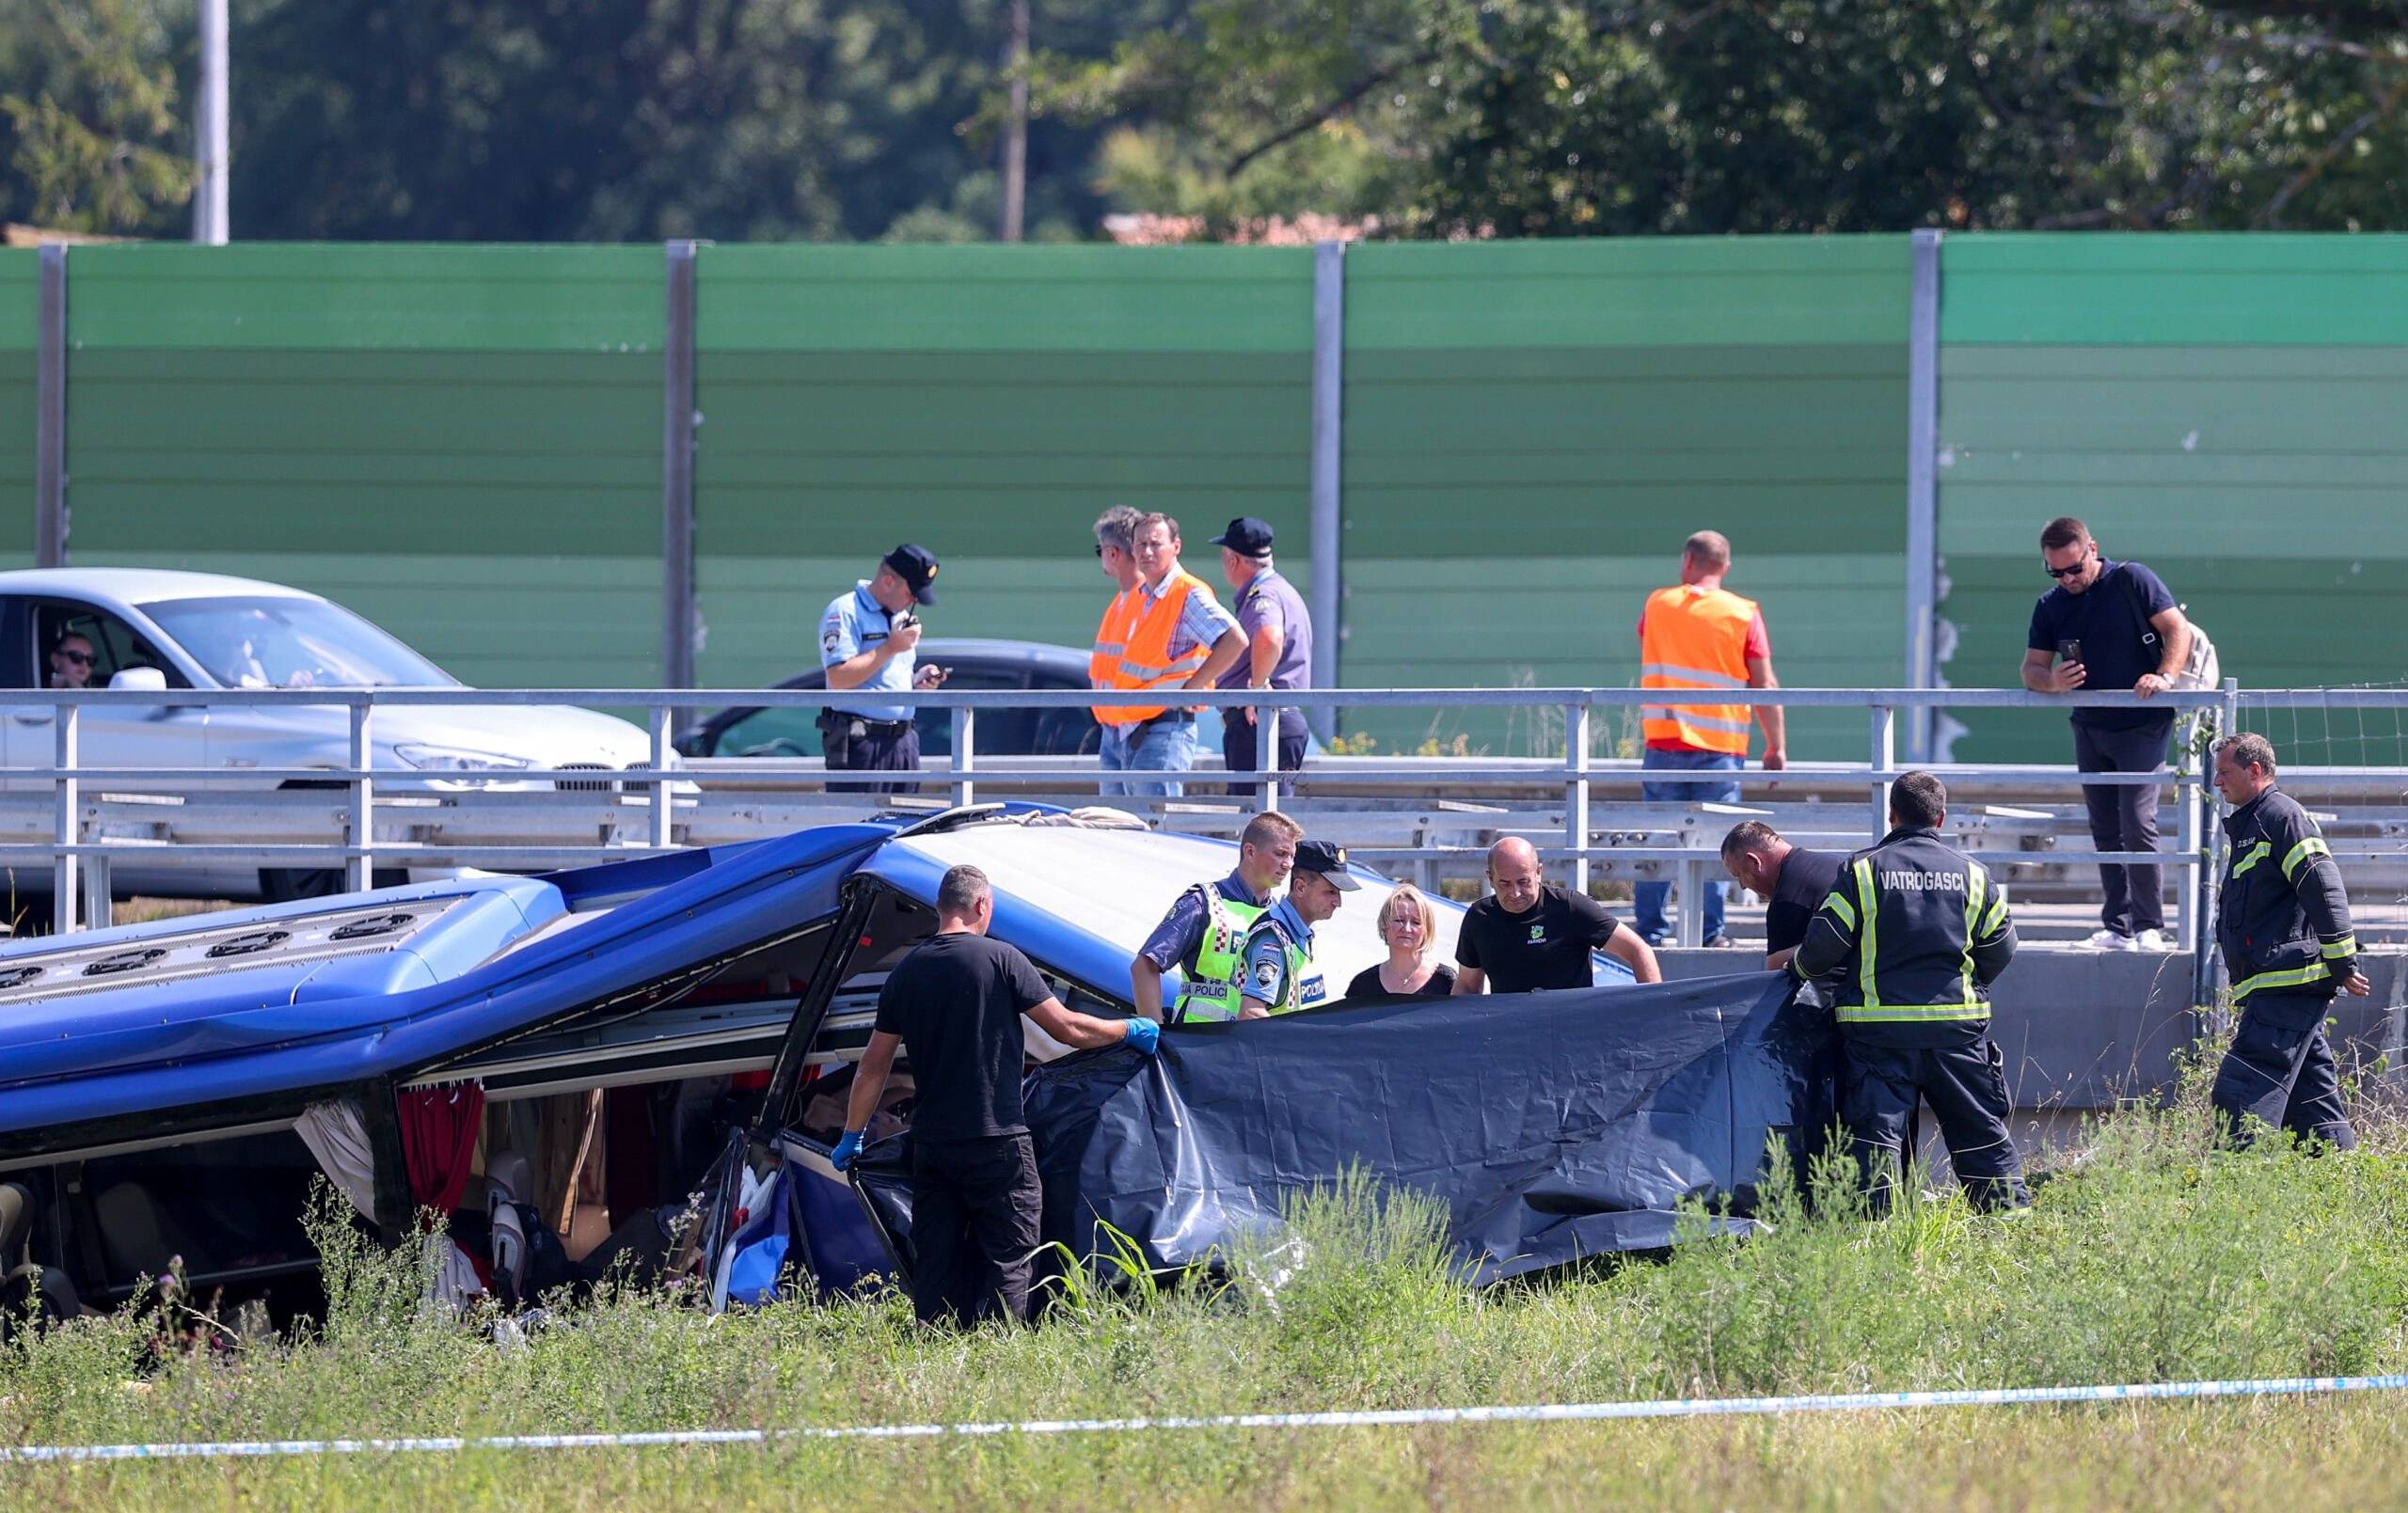 Members of the Police and emergency services work on the Varazdin-Zagreb highway next to the wreckage of the bus after the accident that happened early this morning some 50 kilometers from Zagreb, on August 6, 2022. - Eleven people died on August 6, 2022 and several others were injured when a Polish bus bound for Zagreb veered off the highway in northern Croatia, the Interior Ministry said. (Photo by Damir Sen?ar / AFP)